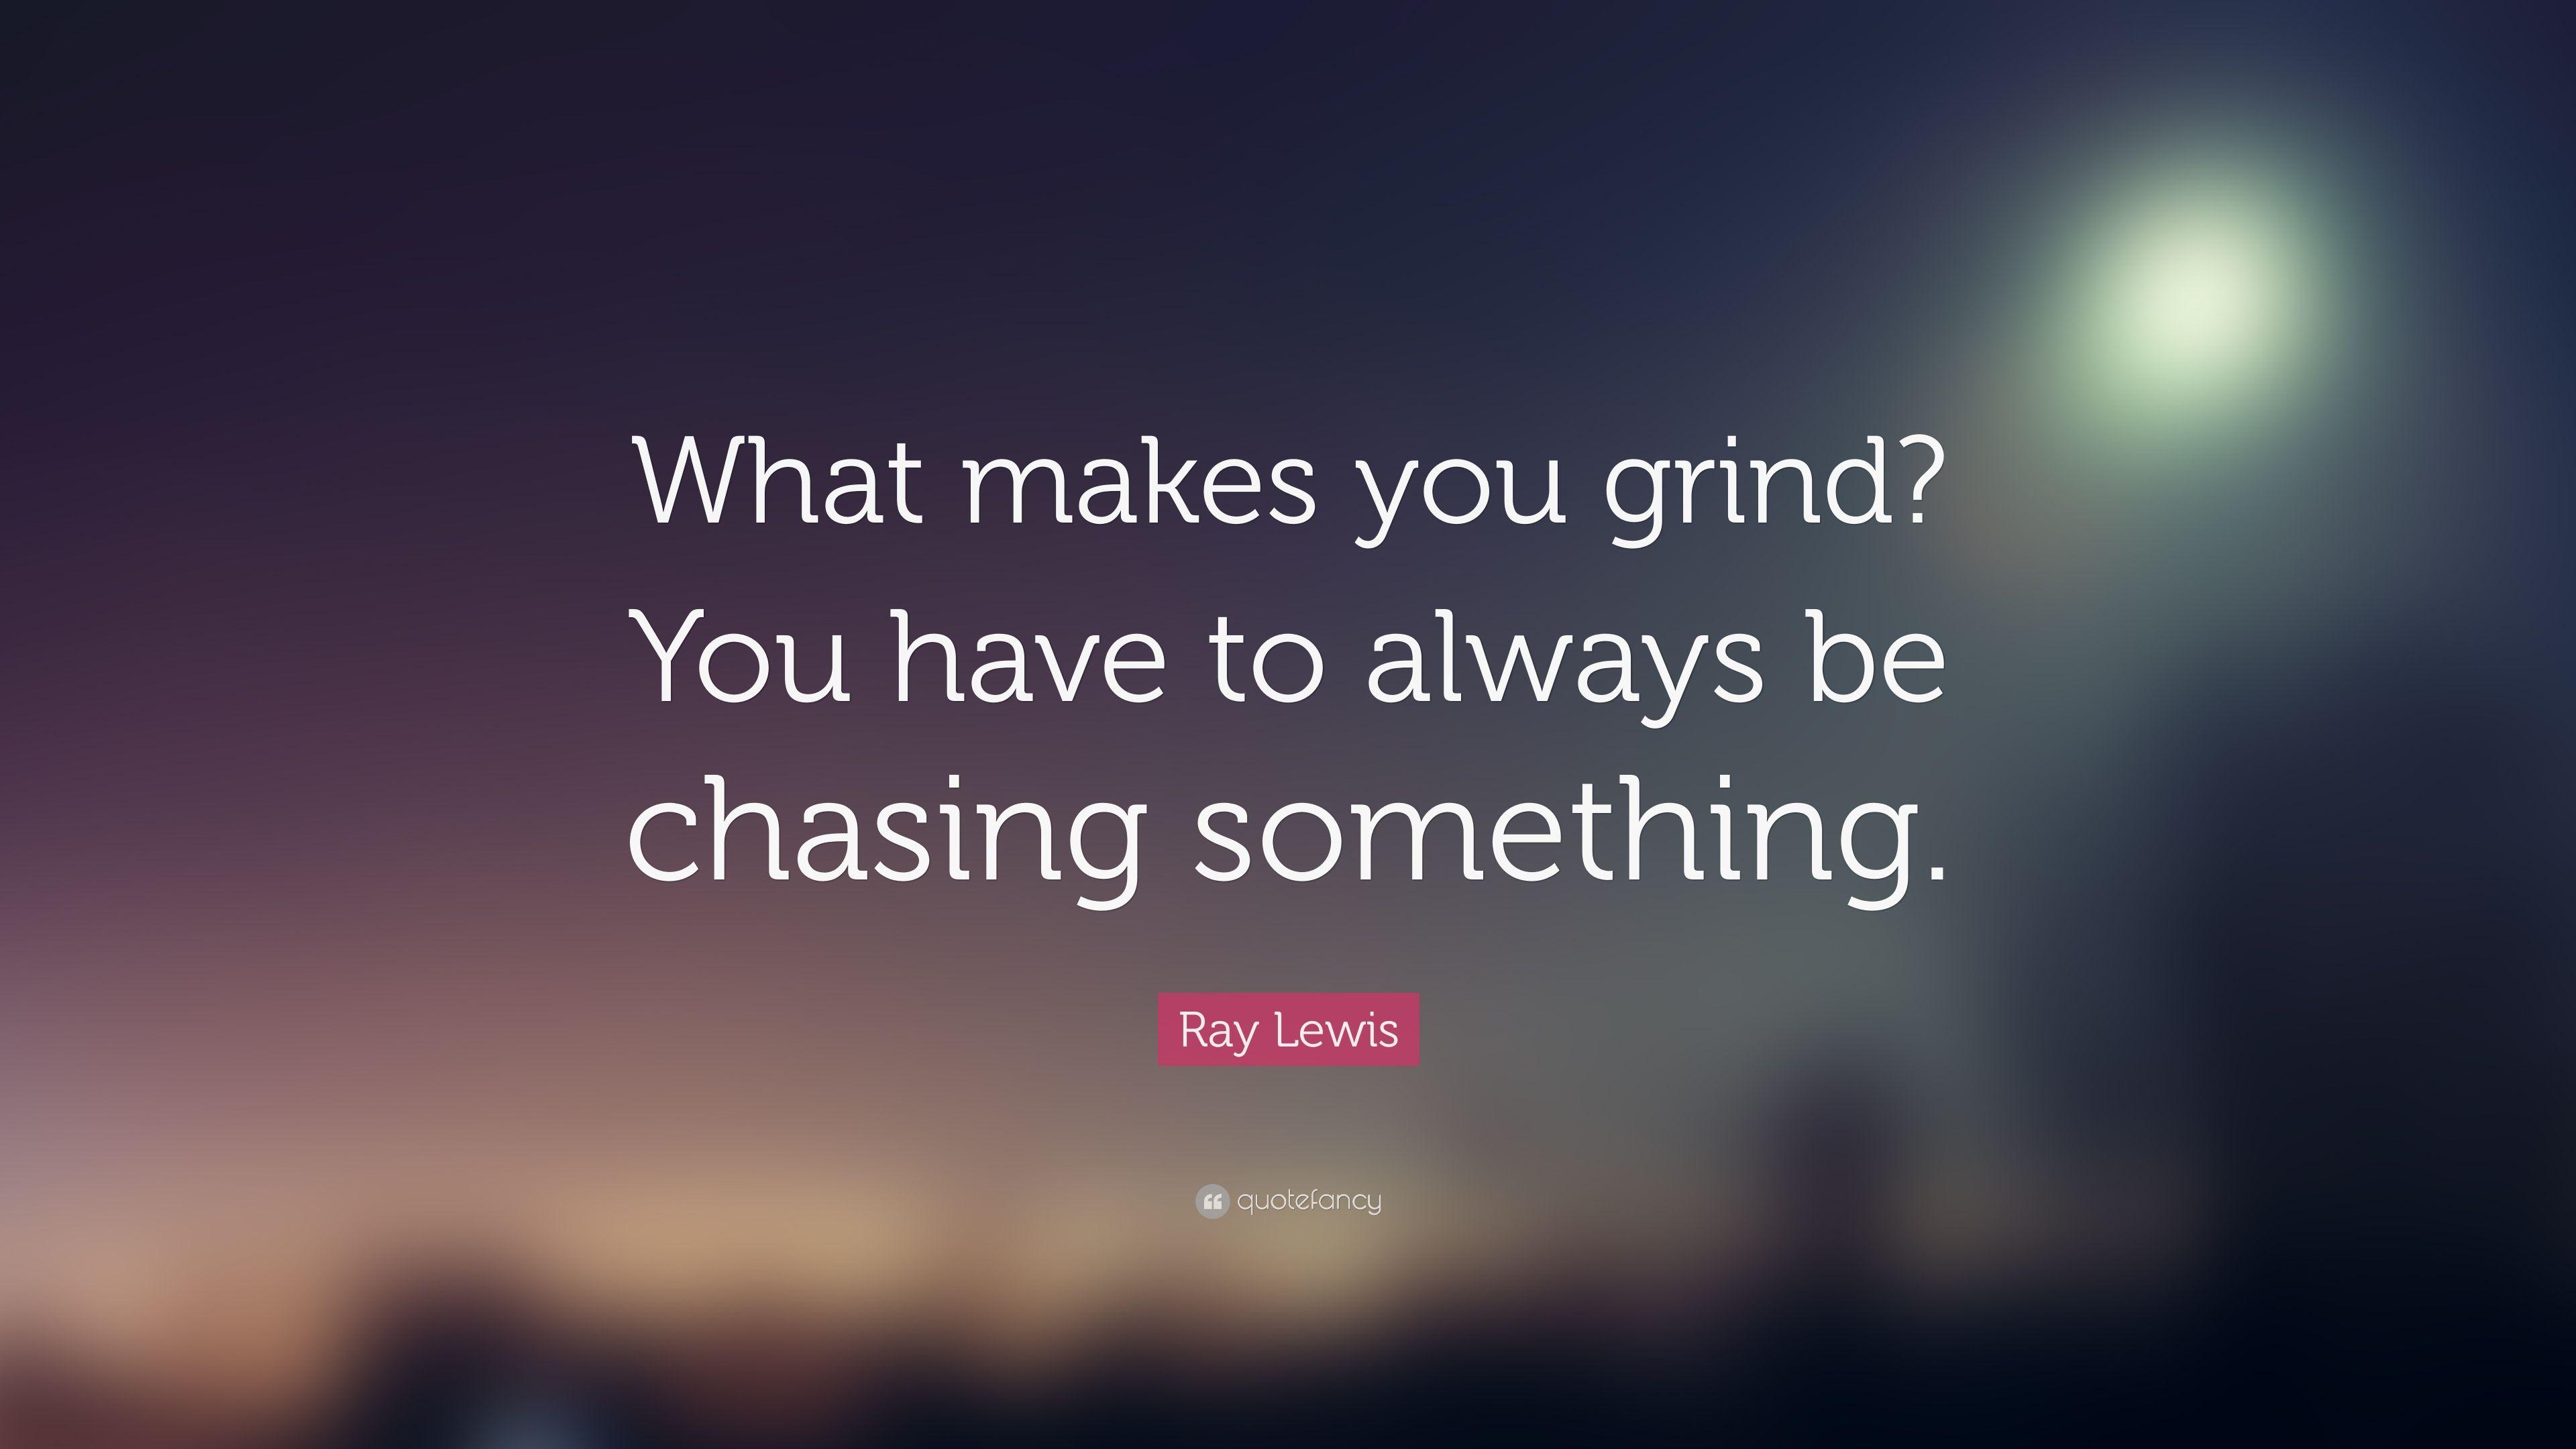 Ray Lewis Quote: “What makes you grind? You have to always be